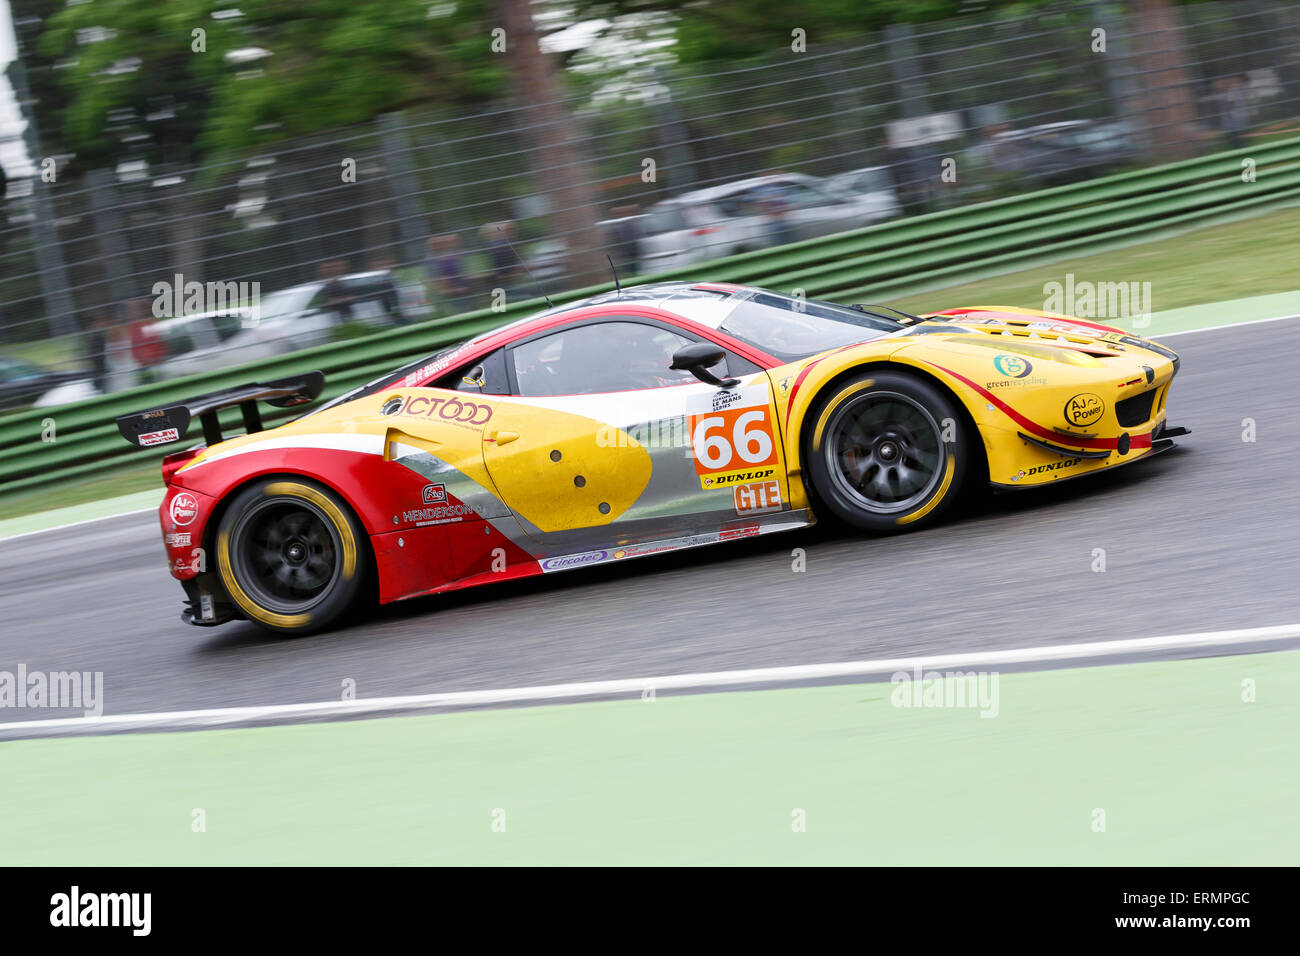 Imola, Italy – May 16, 2015: Ferrari F458 Italia of JMW MOTORSPORT Team in action during the European Le Mans Series - 4 Hours Stock Photo